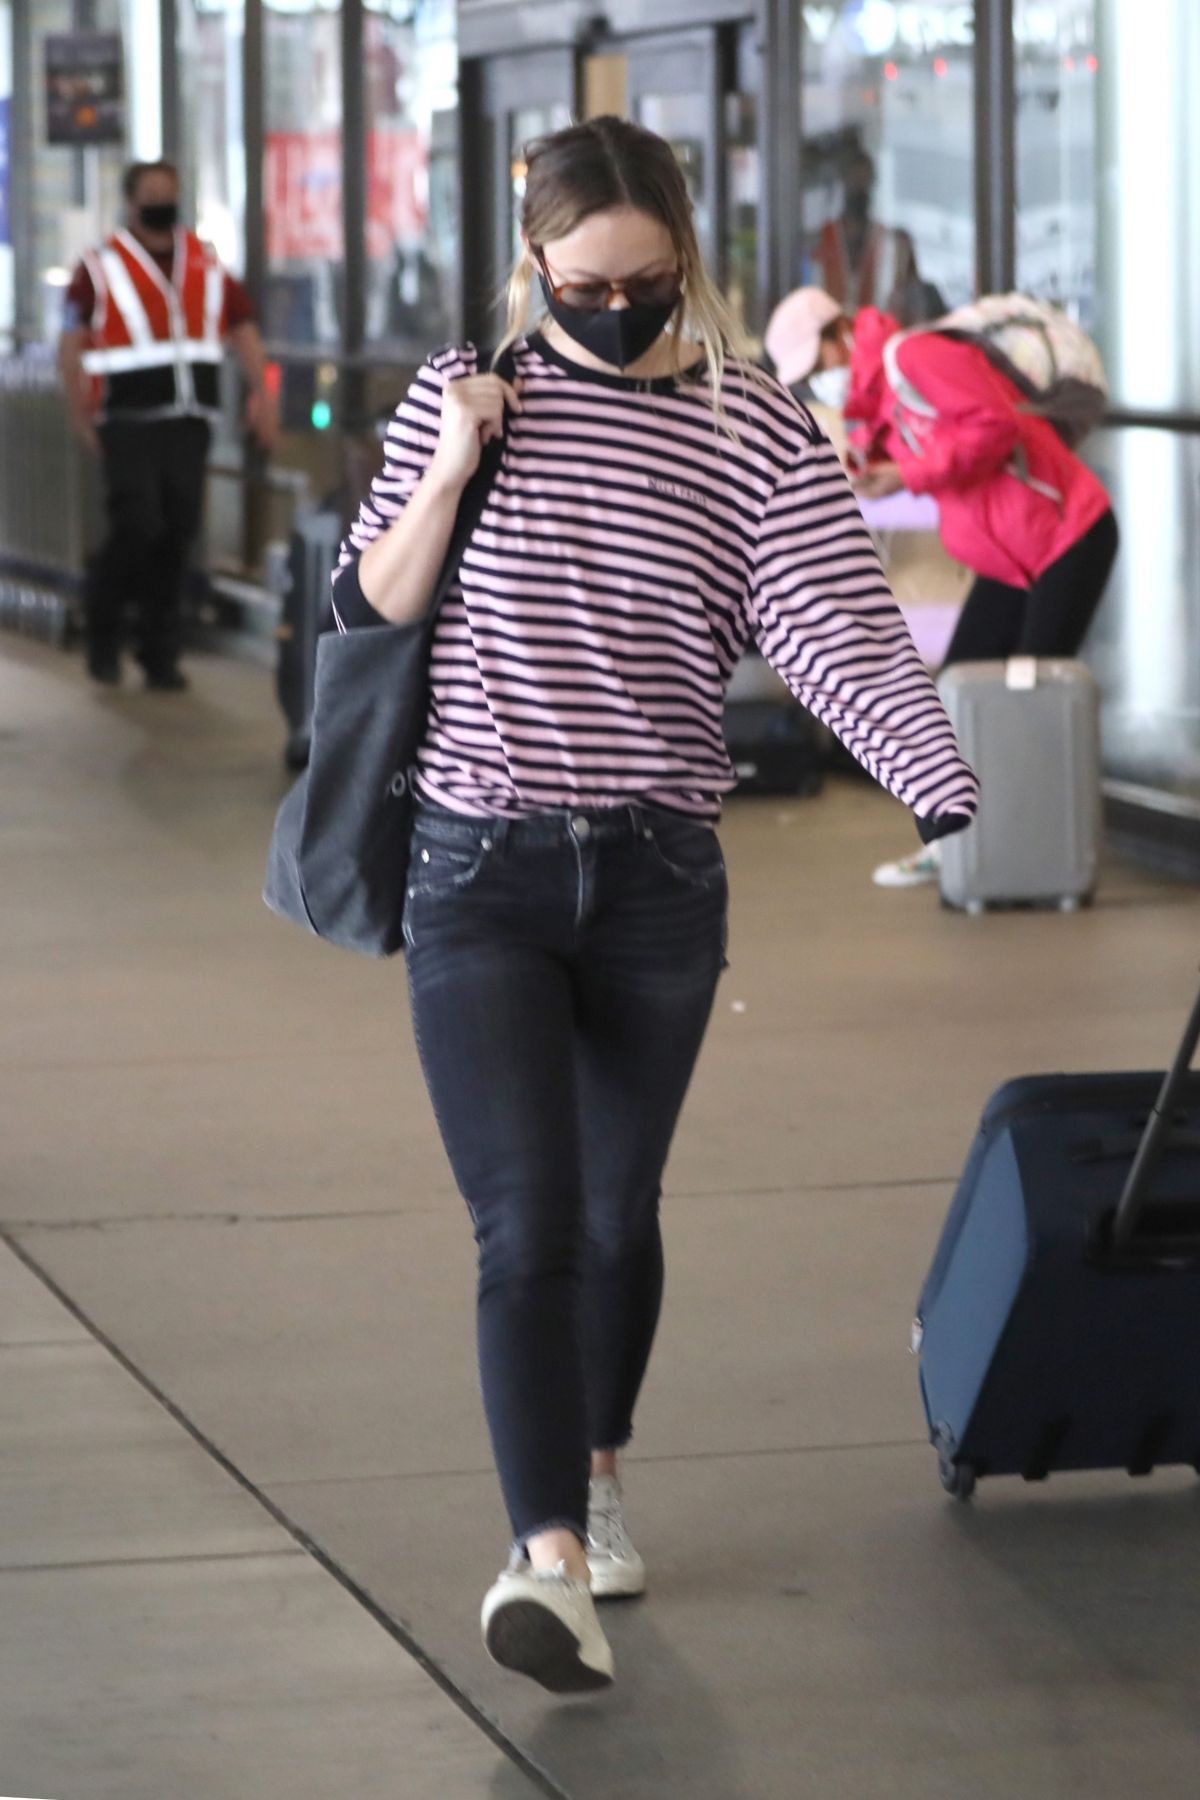 OLIVIA WILDE Arrives at LAX Airport in Los Angeles 06/20/2021 – HawtCelebs